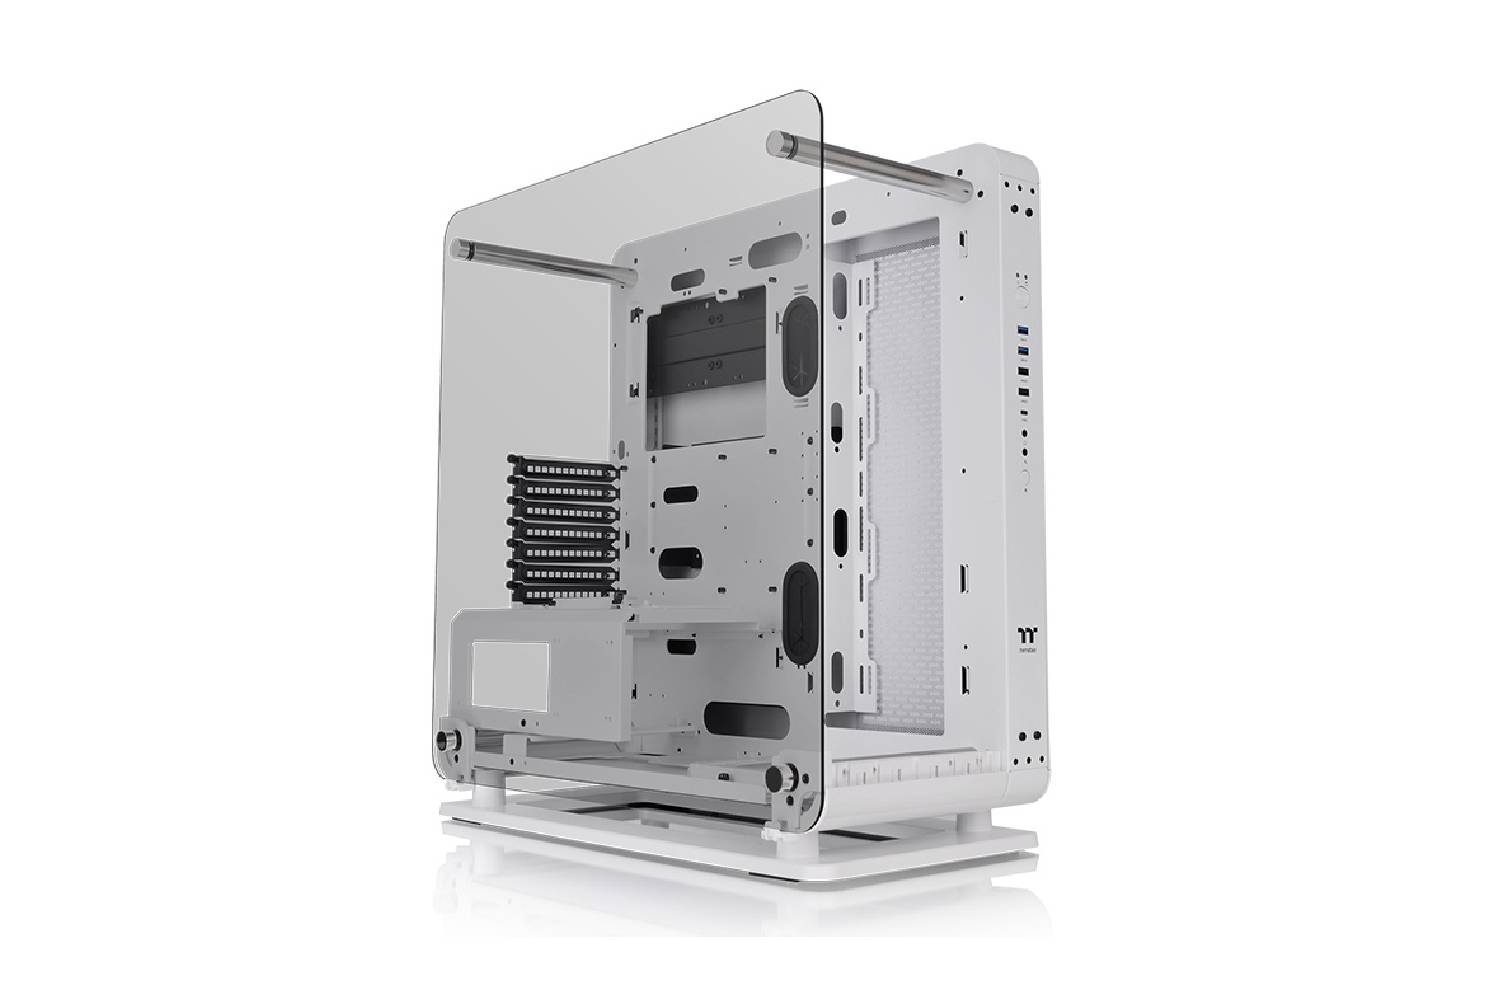 Thermaltake Core P6 Tempered Glass Mid Tower Chassis cabinet - white-CABINETS-Thermaltake-computerspace